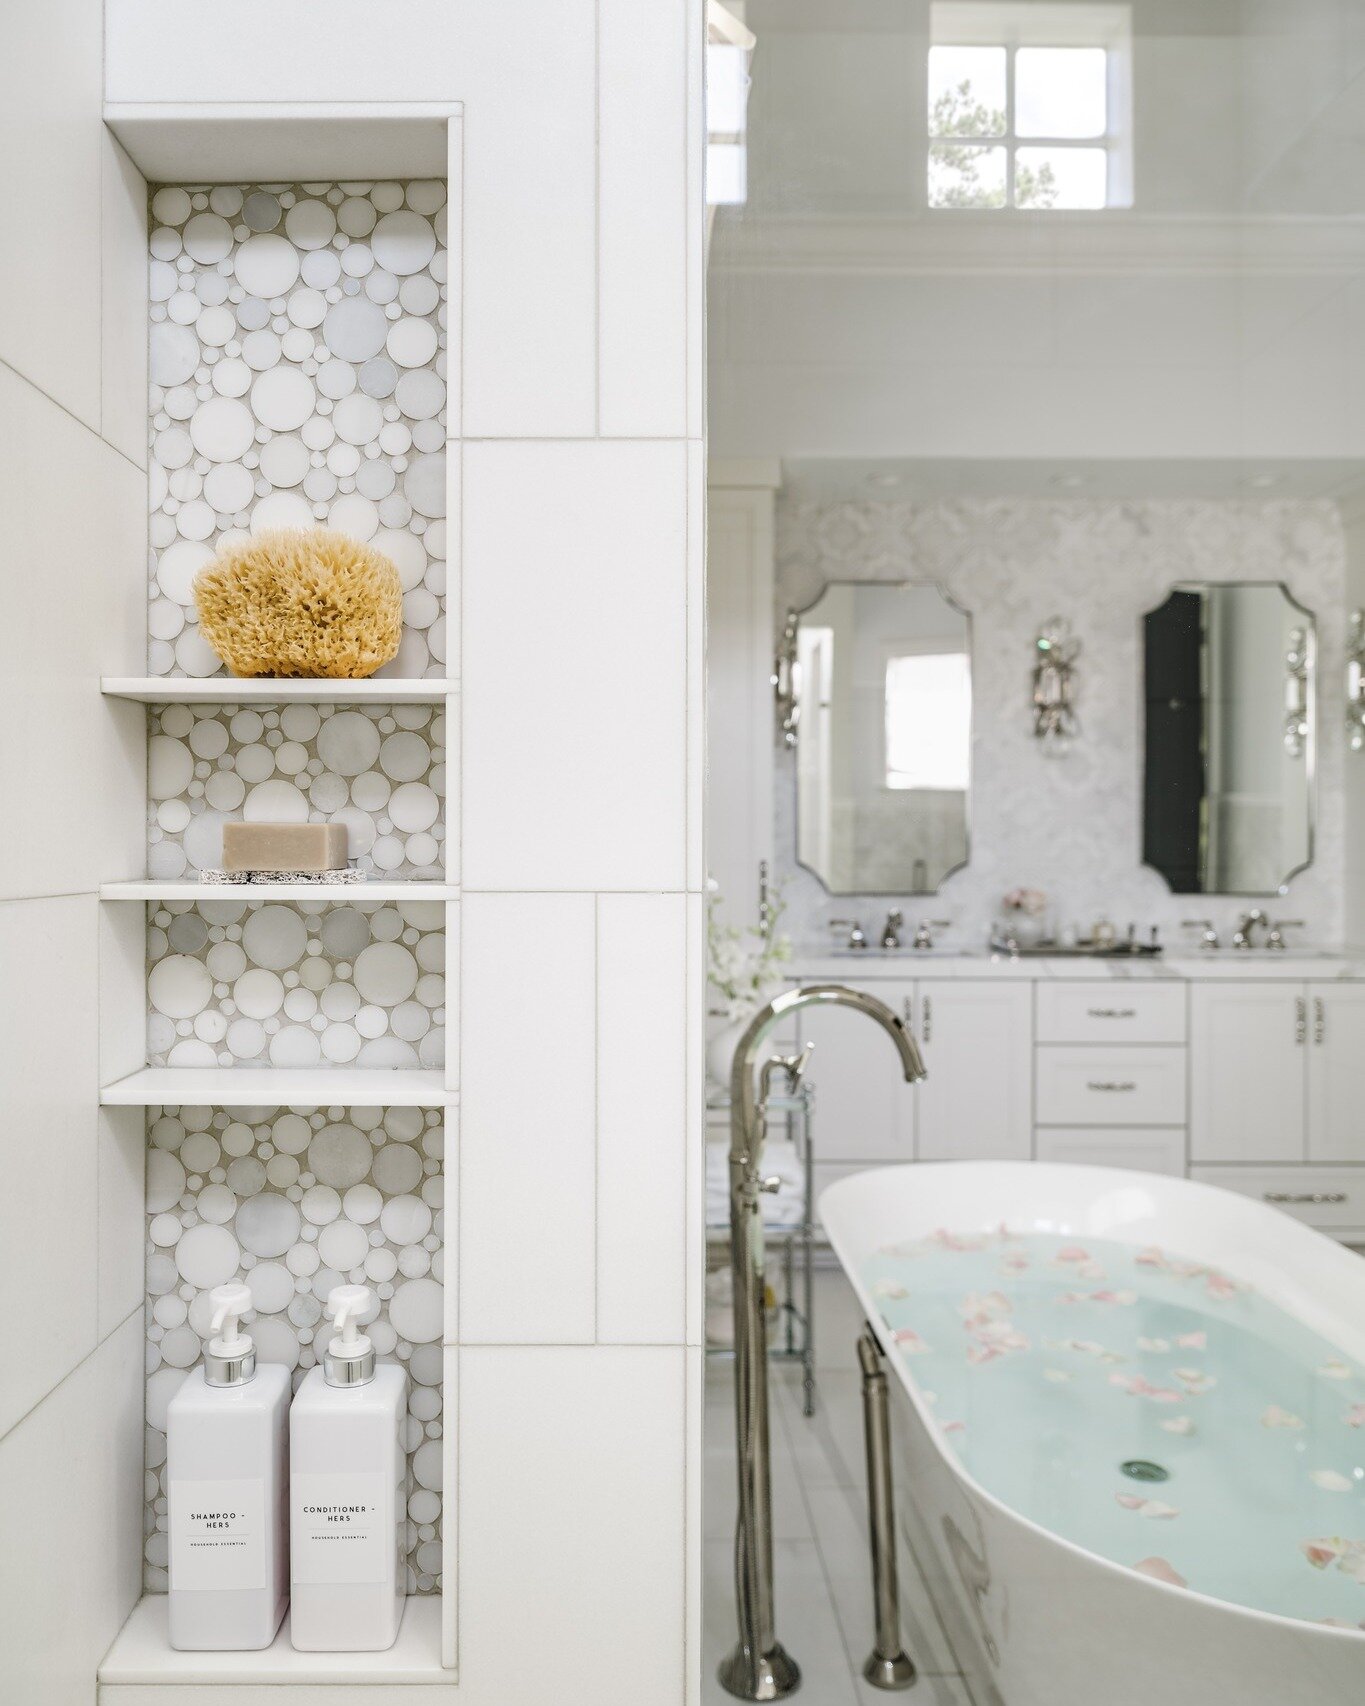 Relax. Refresh. Recharge. 🛁

design: @danielleknoxinteriors 
photo: @tiffanyringwald 

.
.
.
#danielleknoxinteriors #DKI #danielleknoxdesign #interiordesign #davidsonnc #davidsondesign #charlottedesign #charlotteinteriordesign #charlotteinteriordesi